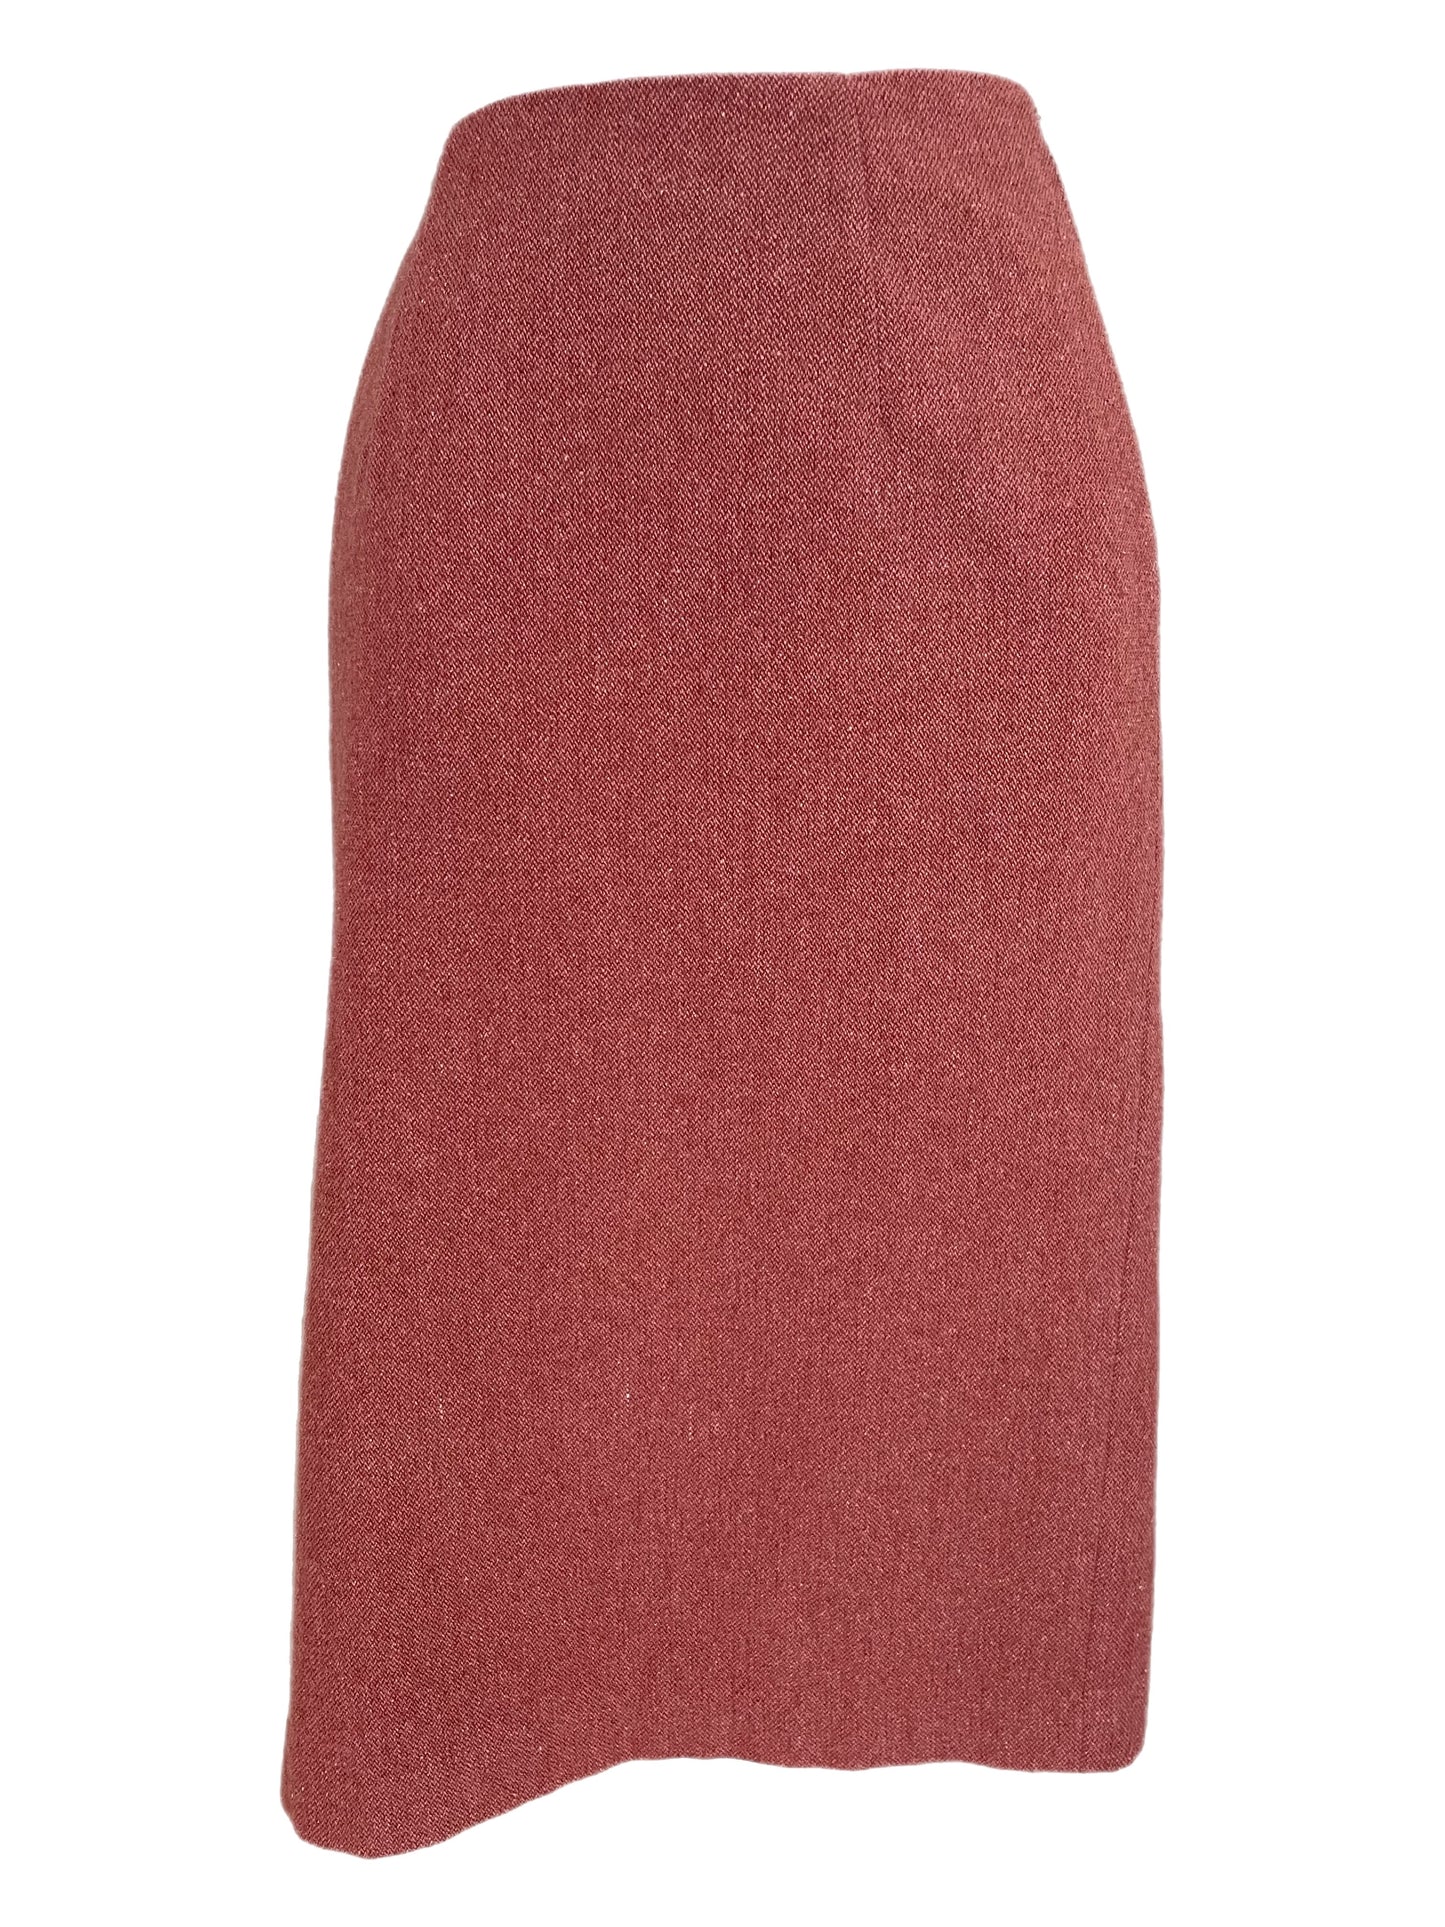 Skirt- Tweed Design- Red Coloring By Rebecca Taylor